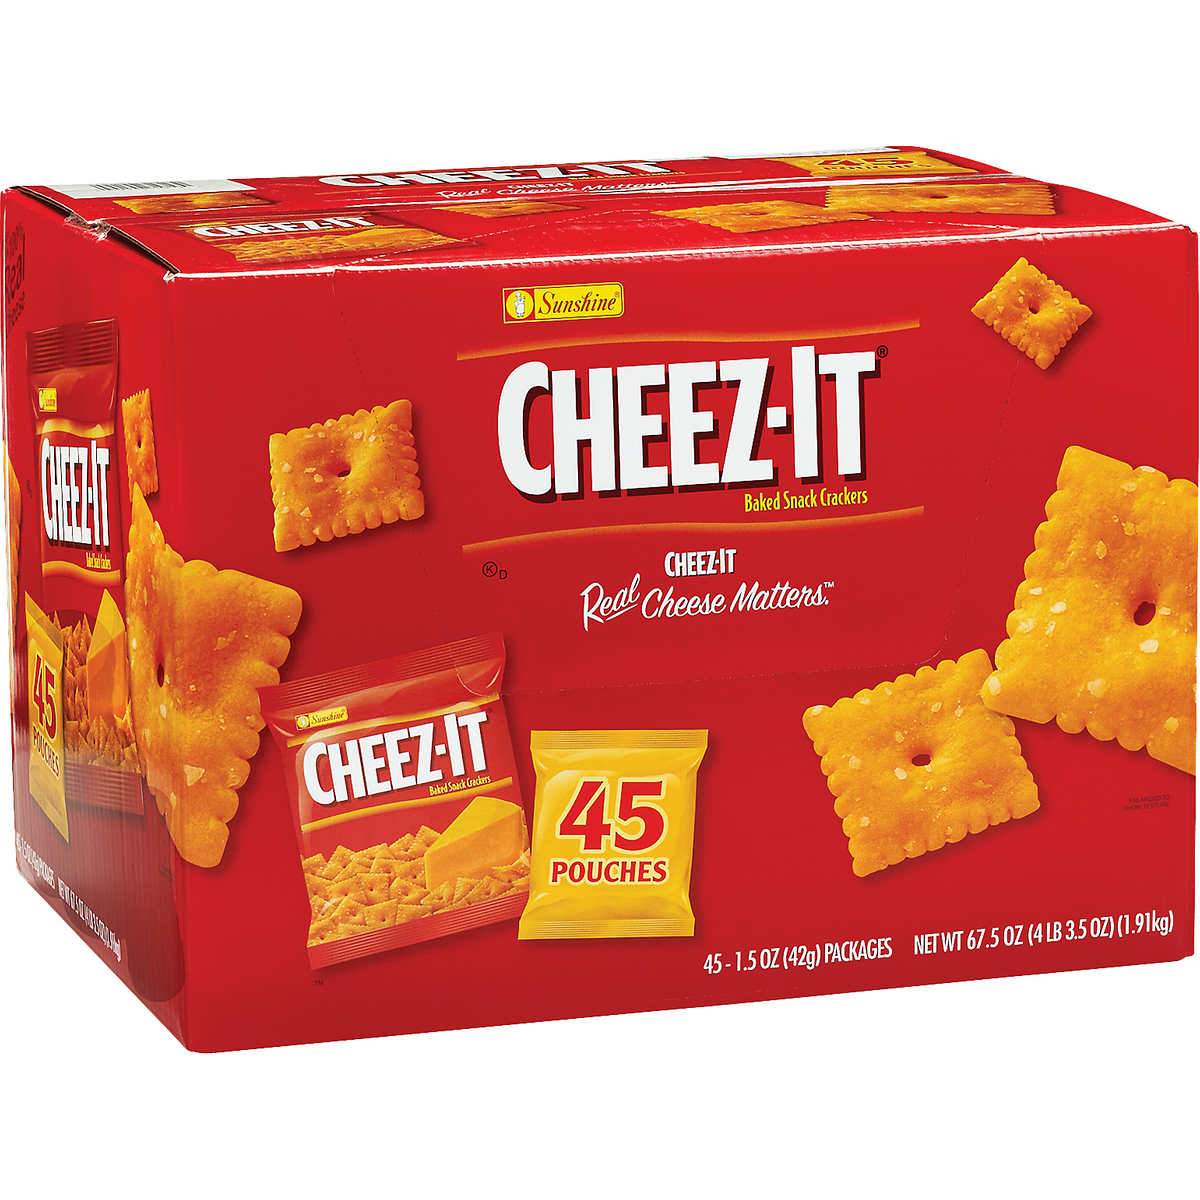 Cheez-It Original Baked Snack Cheese Crackers Cheez-It Original 1.5 Oz-45 Count 